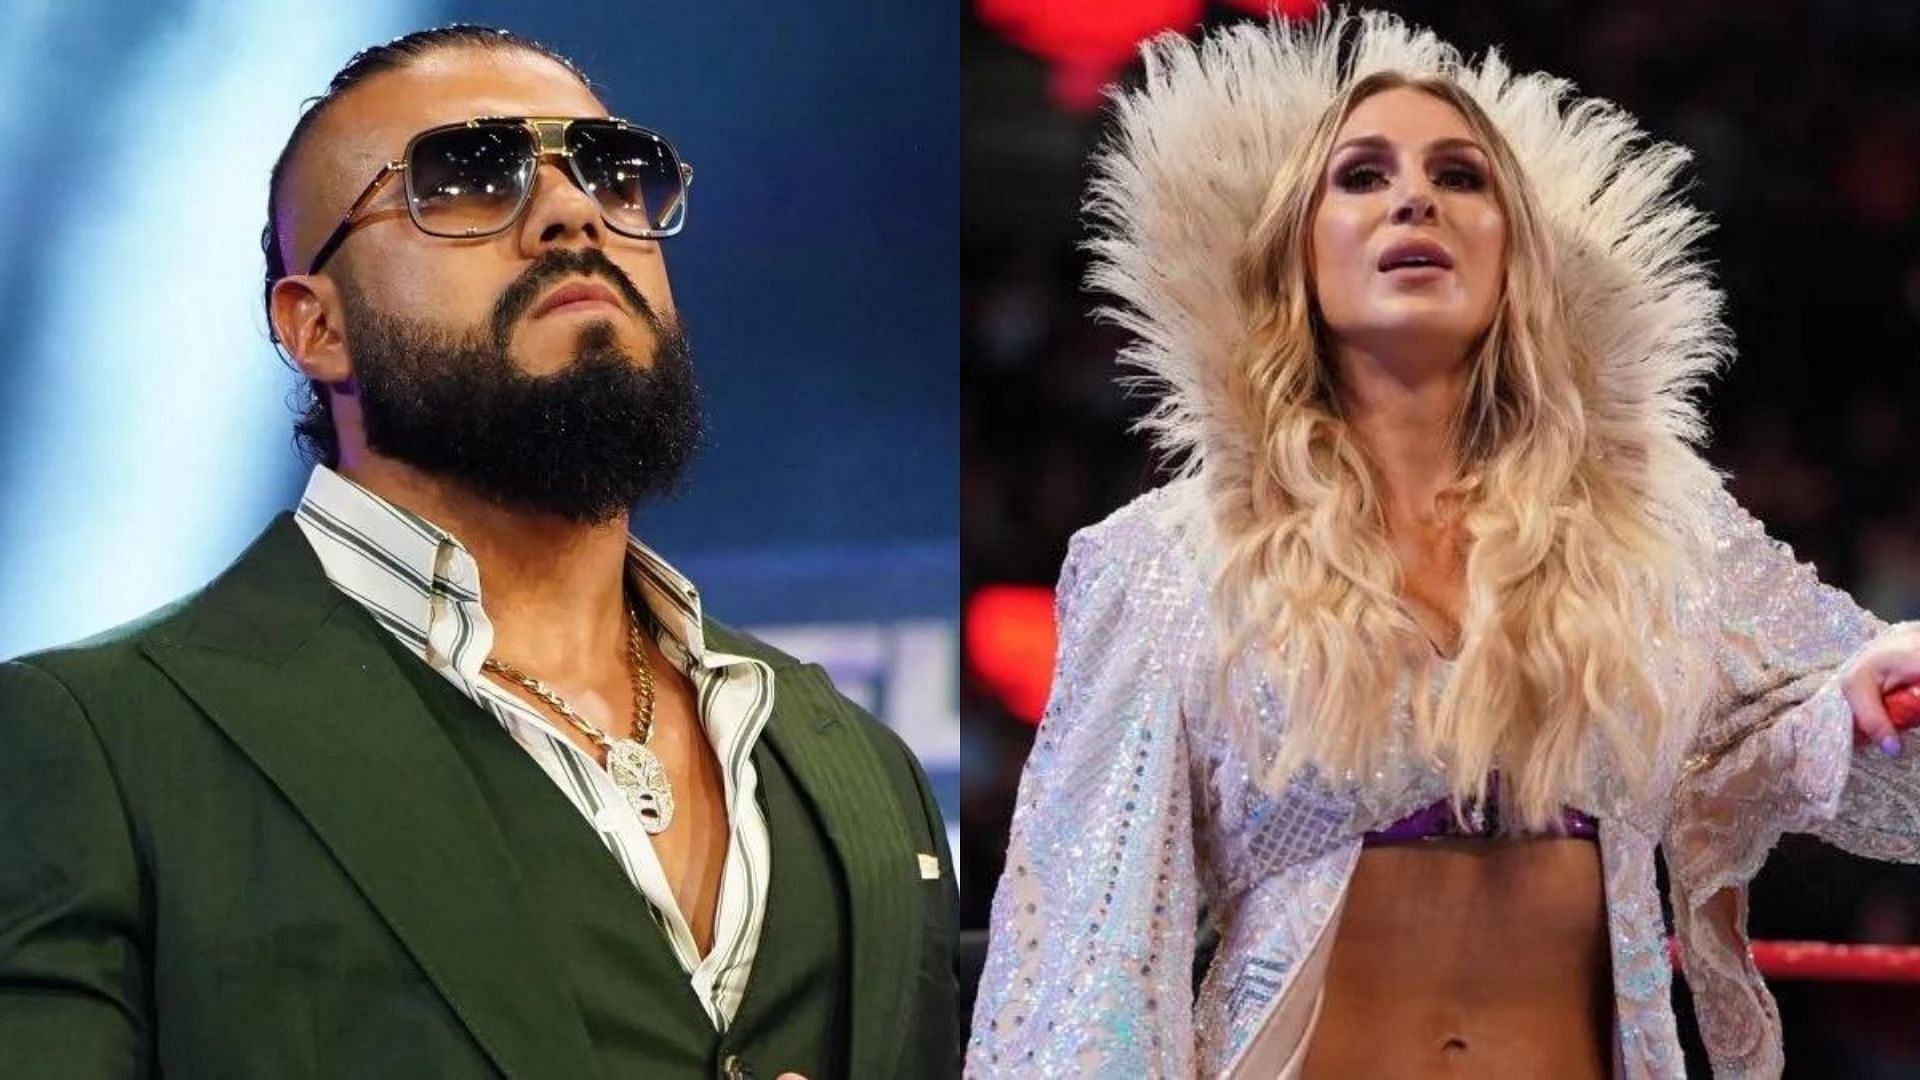 Andrade and Charlotte Flair previously tied the knot